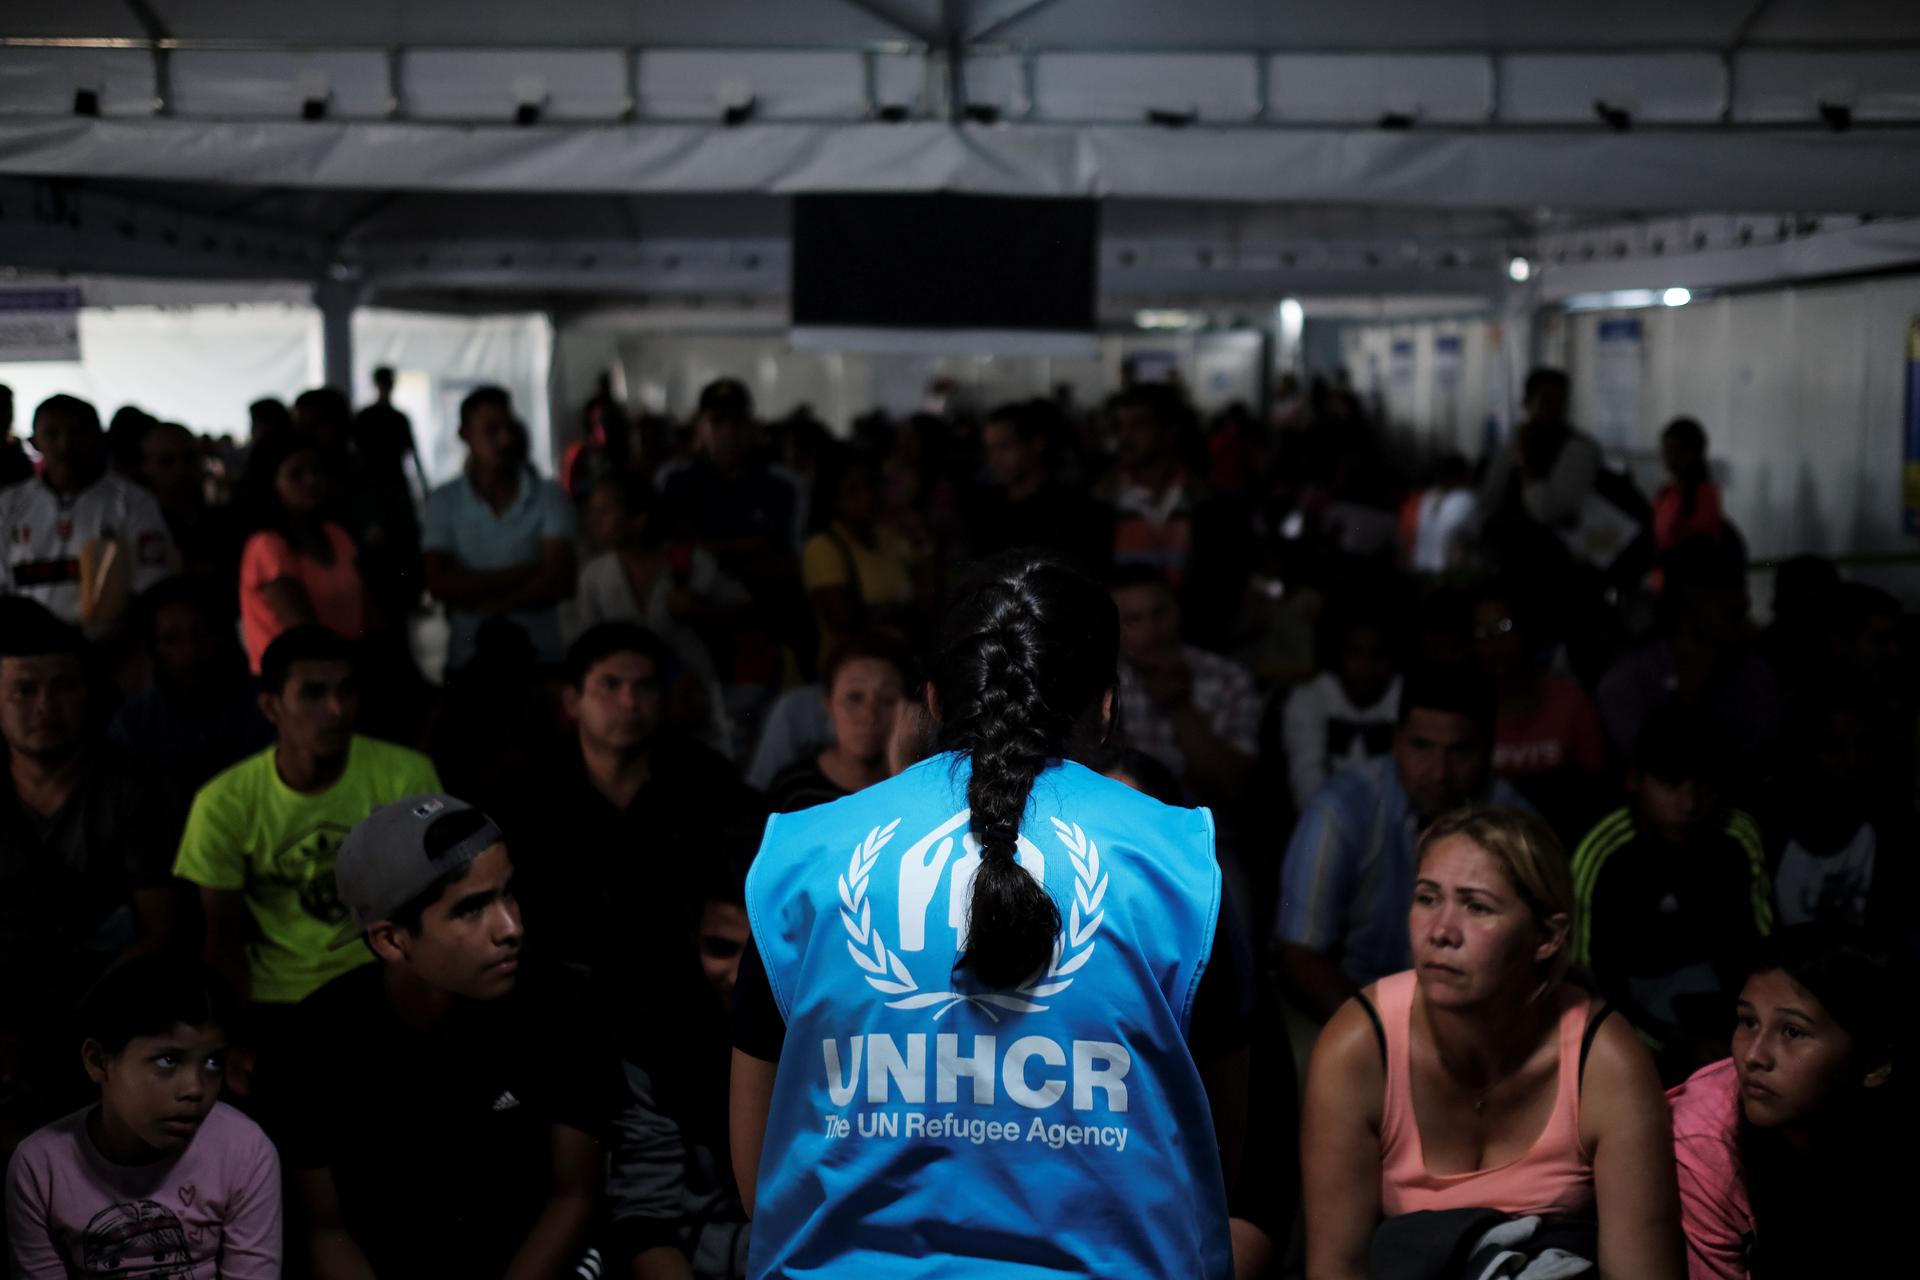 A member of United Nations High Commissioner for Refugees (UNHCR) talks with Venezuelans as they queue in line to receive a vaccine after showing their passports or identity cards at the Pacaraima border control, Roraima state, Brazil, on Aug. 8, 2018. 